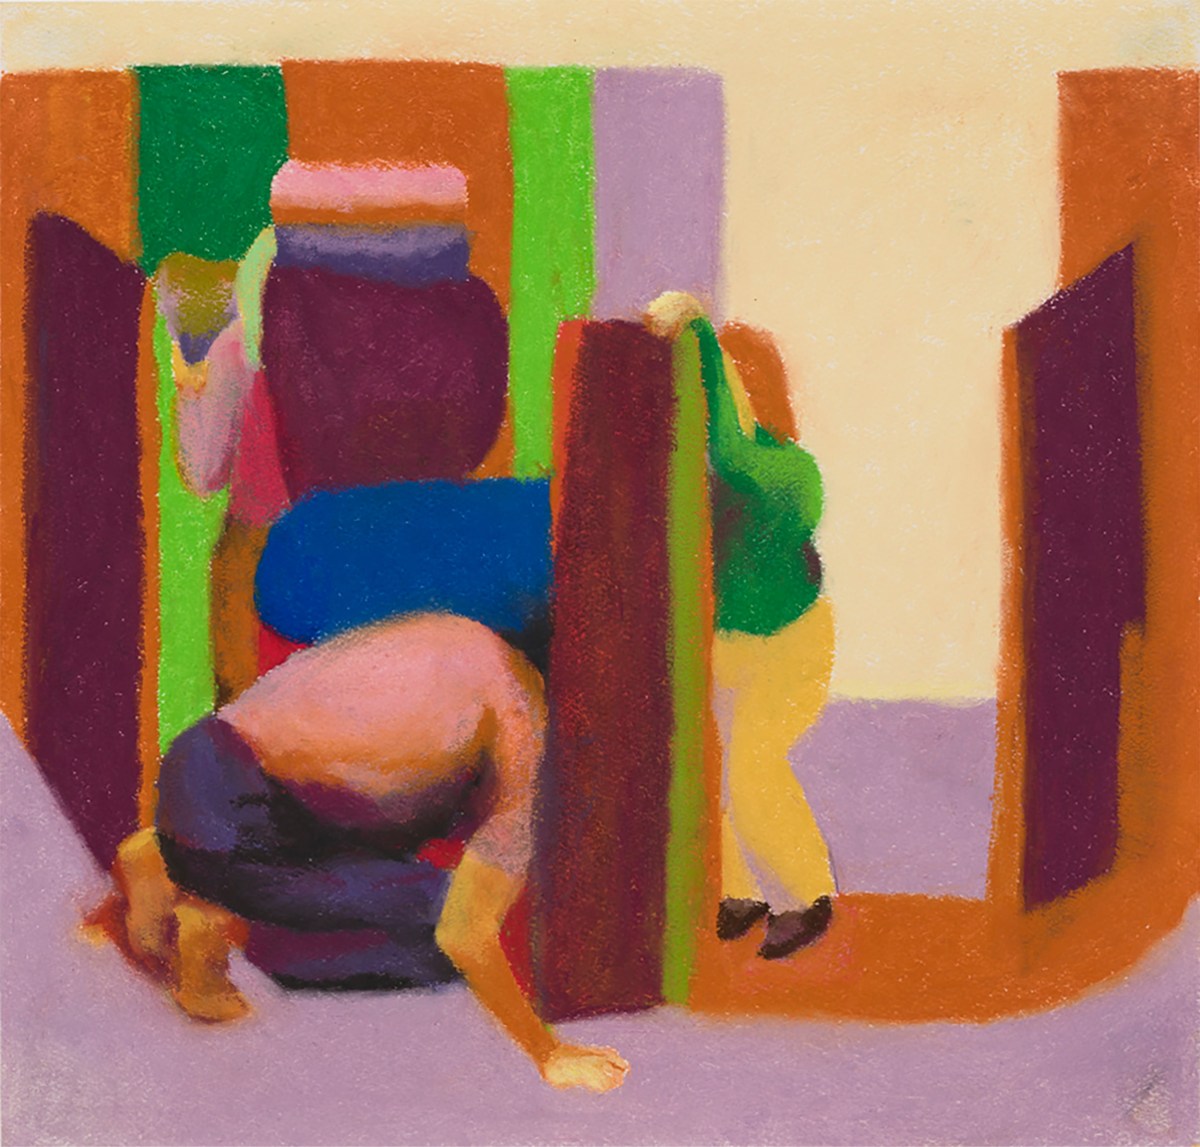 Lavi Daniel, Gathered Over Questions, 2022, Pastel on paper, 9.875 x 10.375 in.